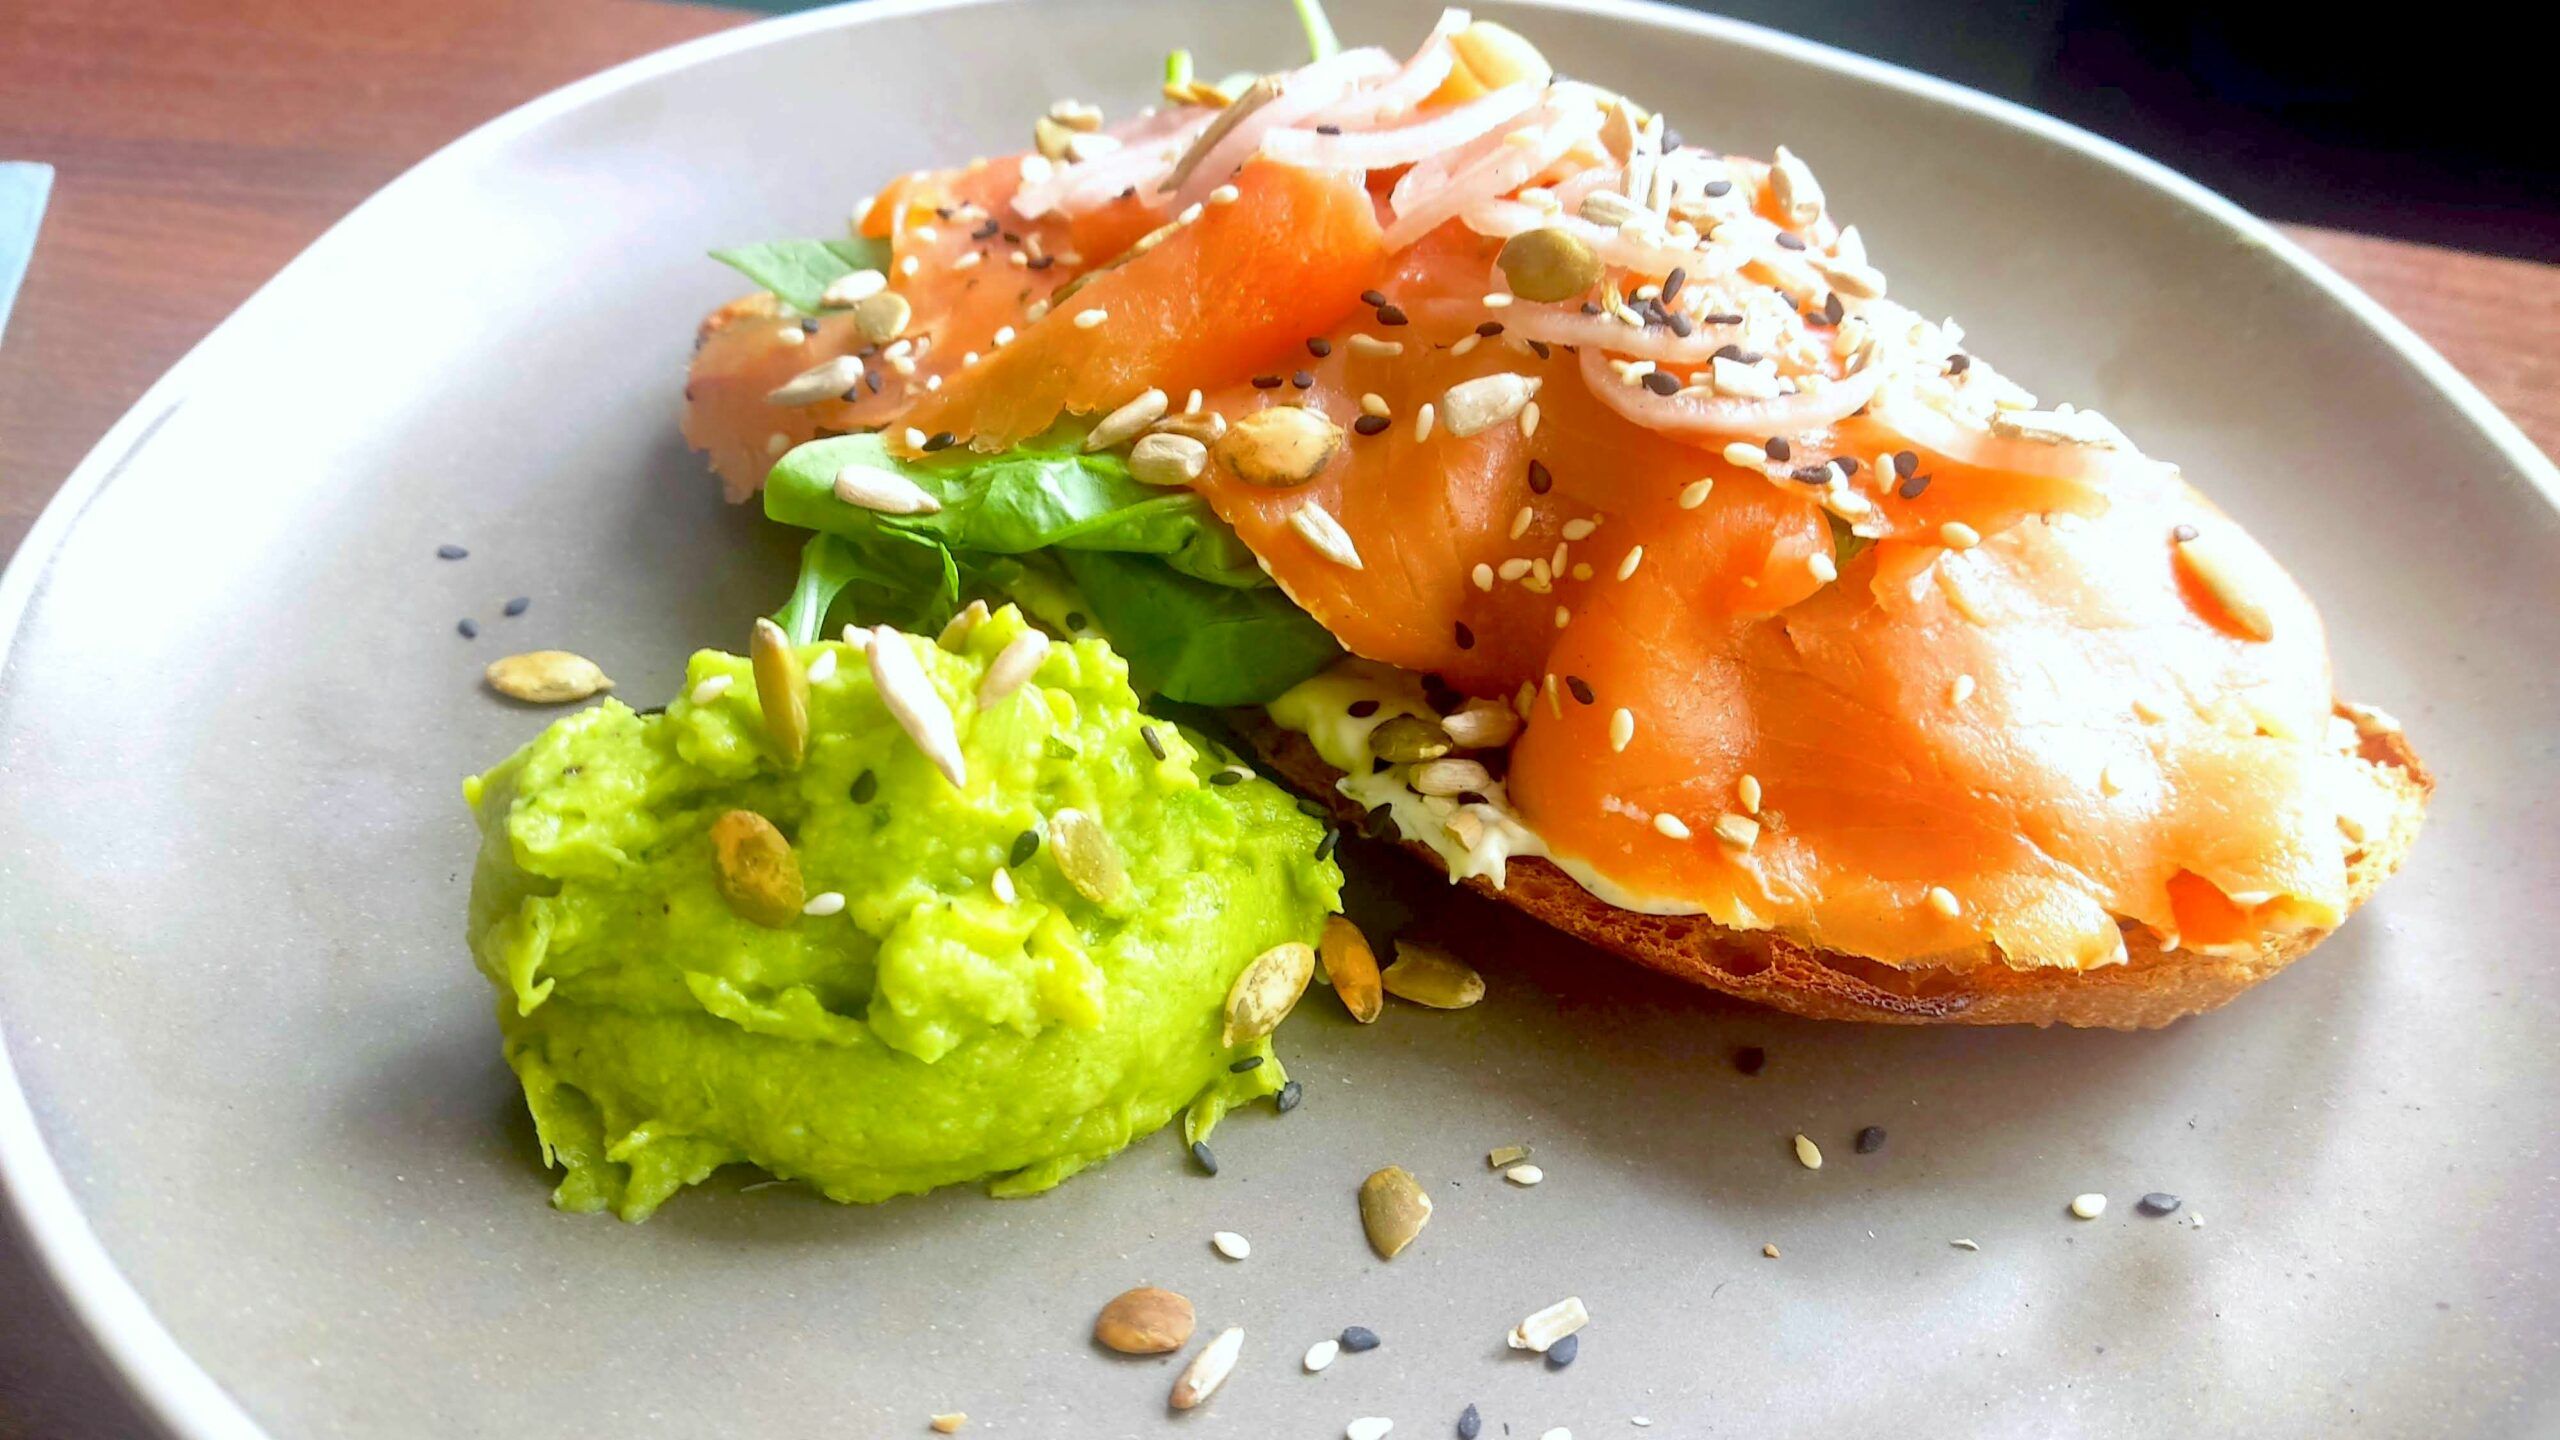 Brunch and Cocktails at Baked Hove. Salmon toast with avocado served on white plate